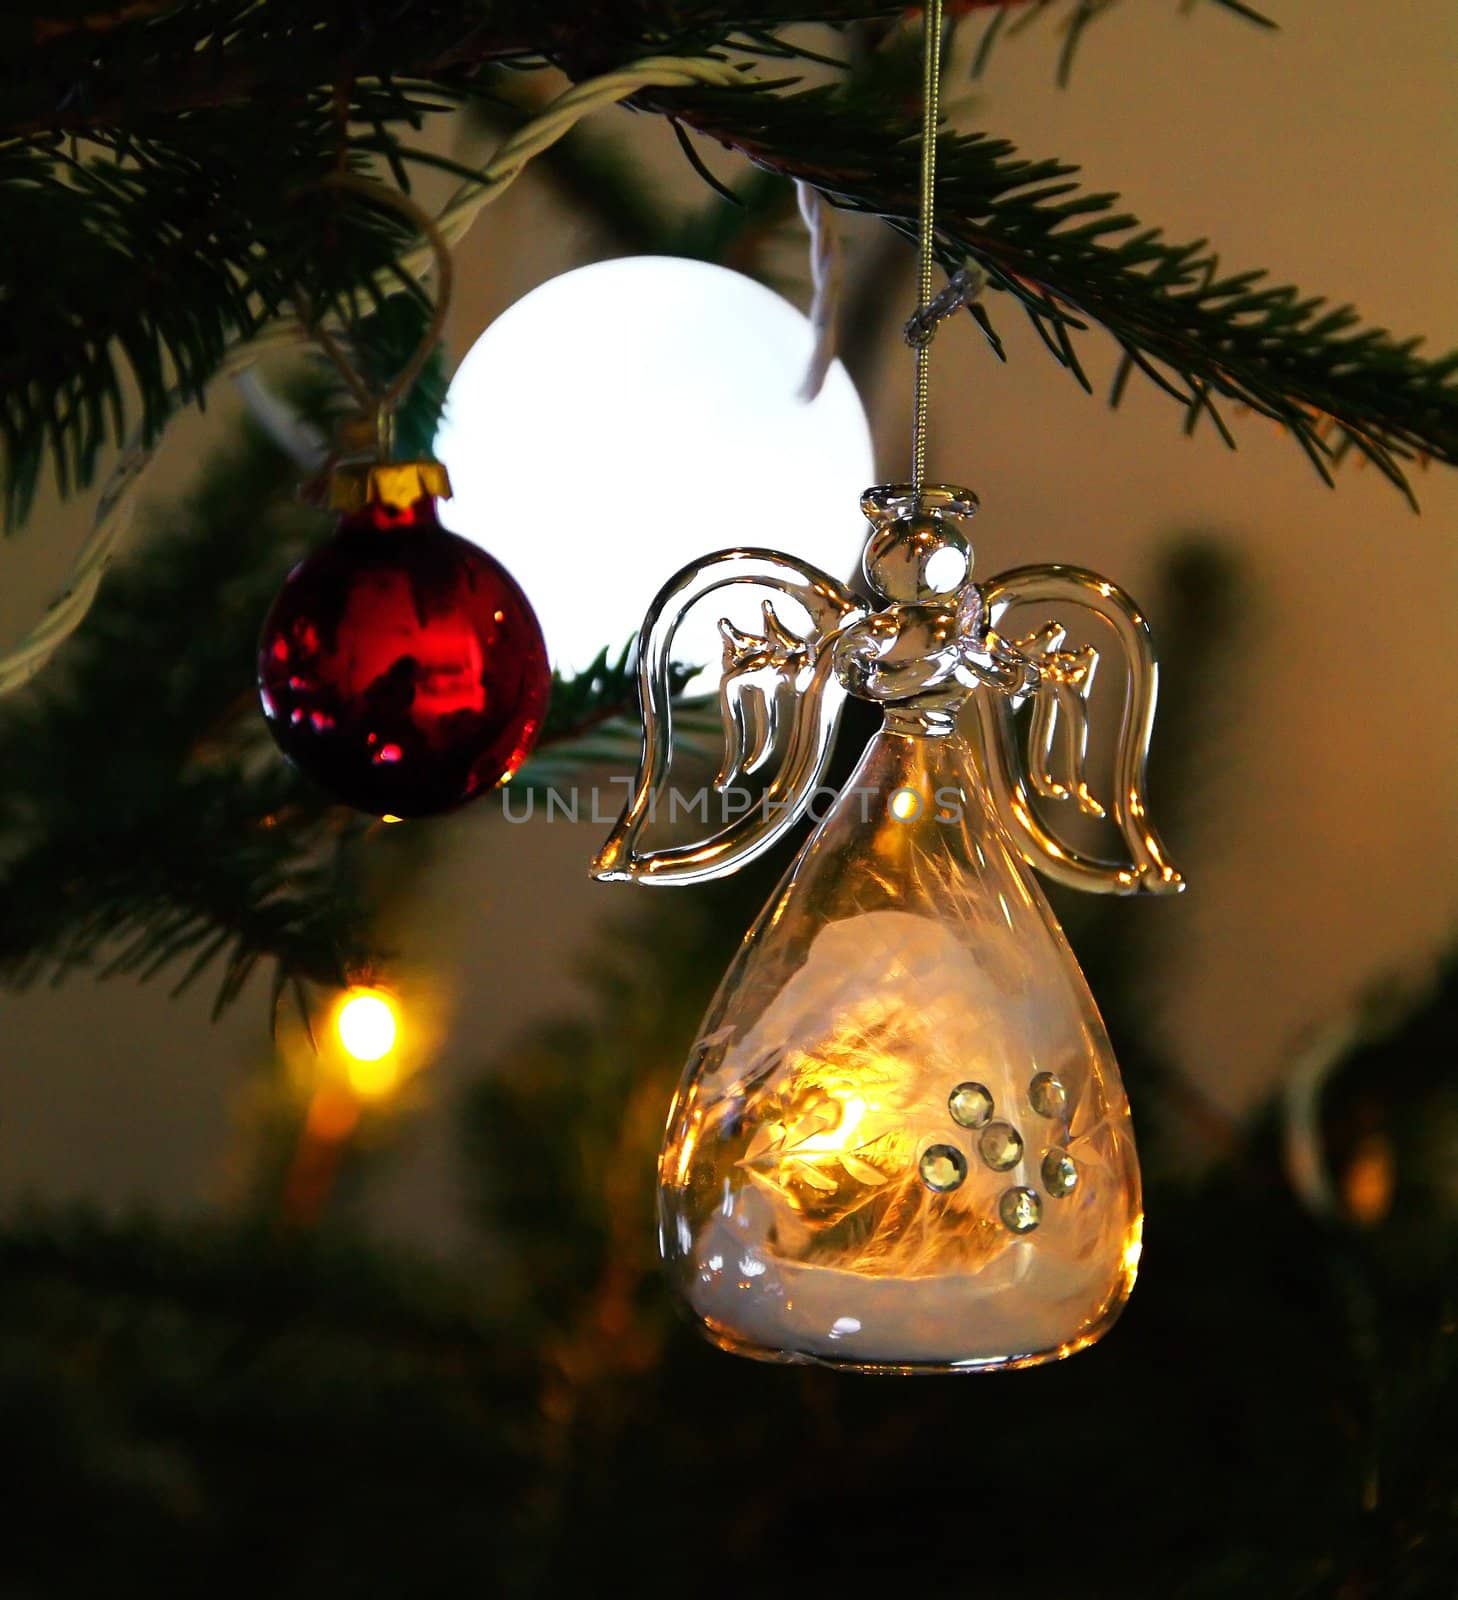 Christmas angel in glass hanging in tree